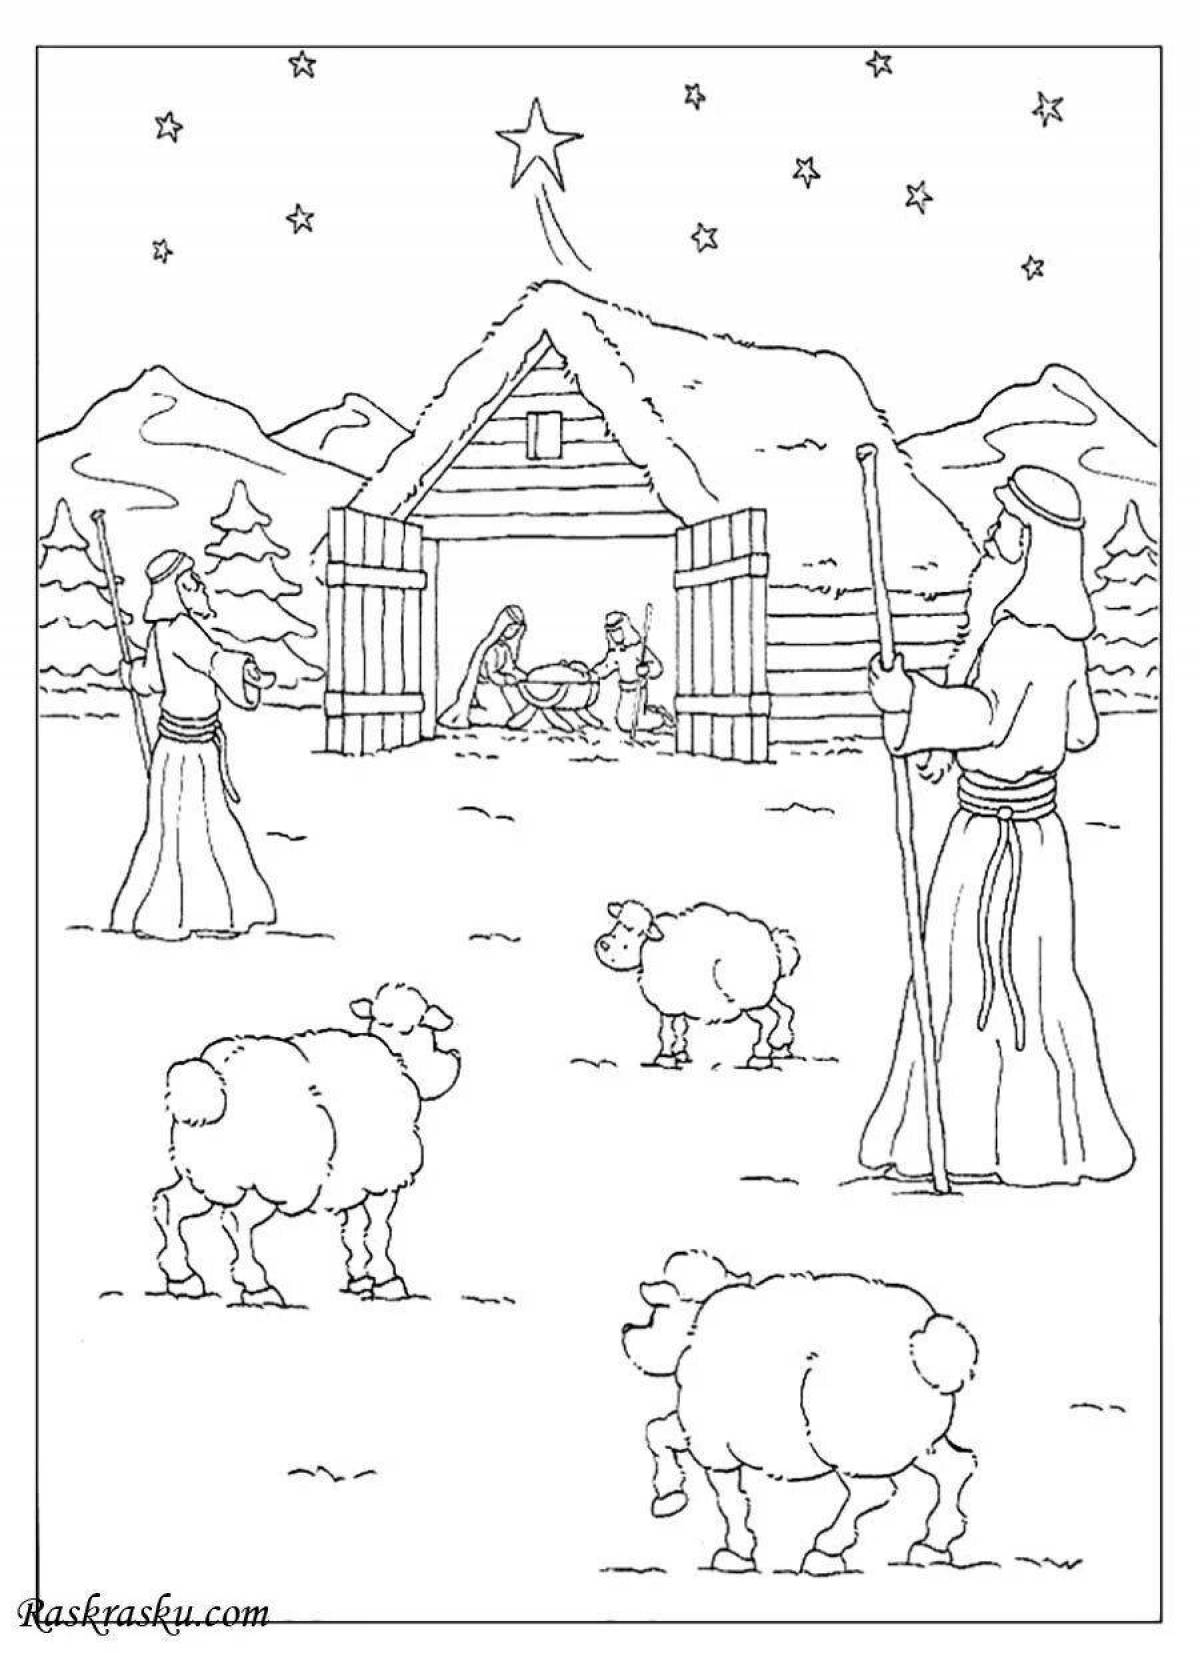 Glowing christmas coloring book for kids